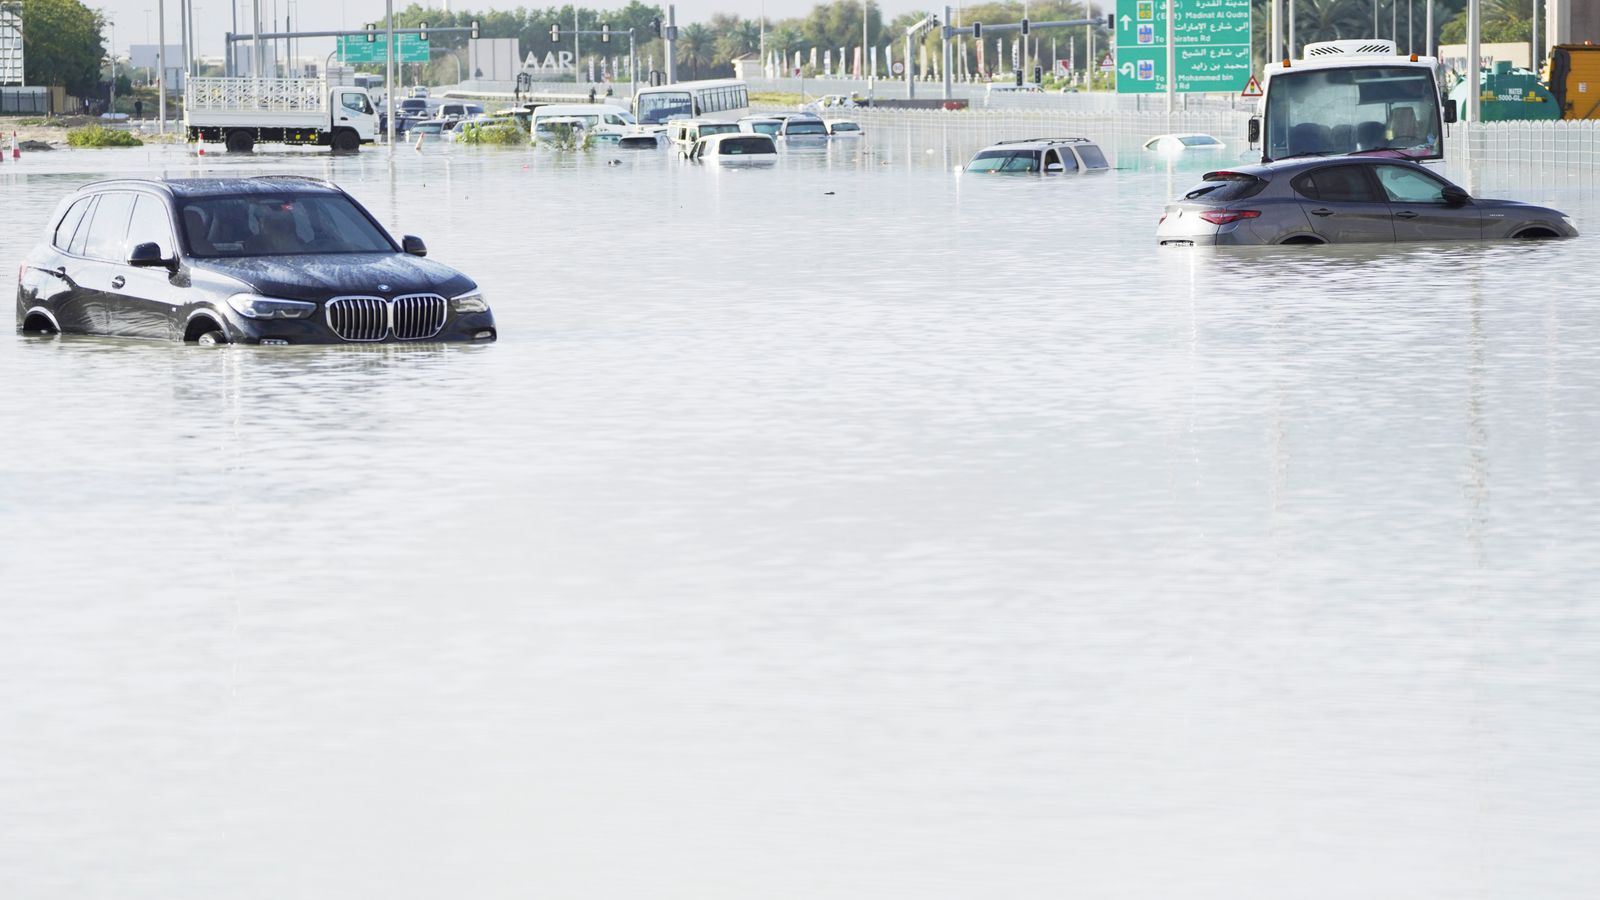 'Carnage' at Dubai airport as UAE hit by 'heaviest rainfall in 75 years' | World News